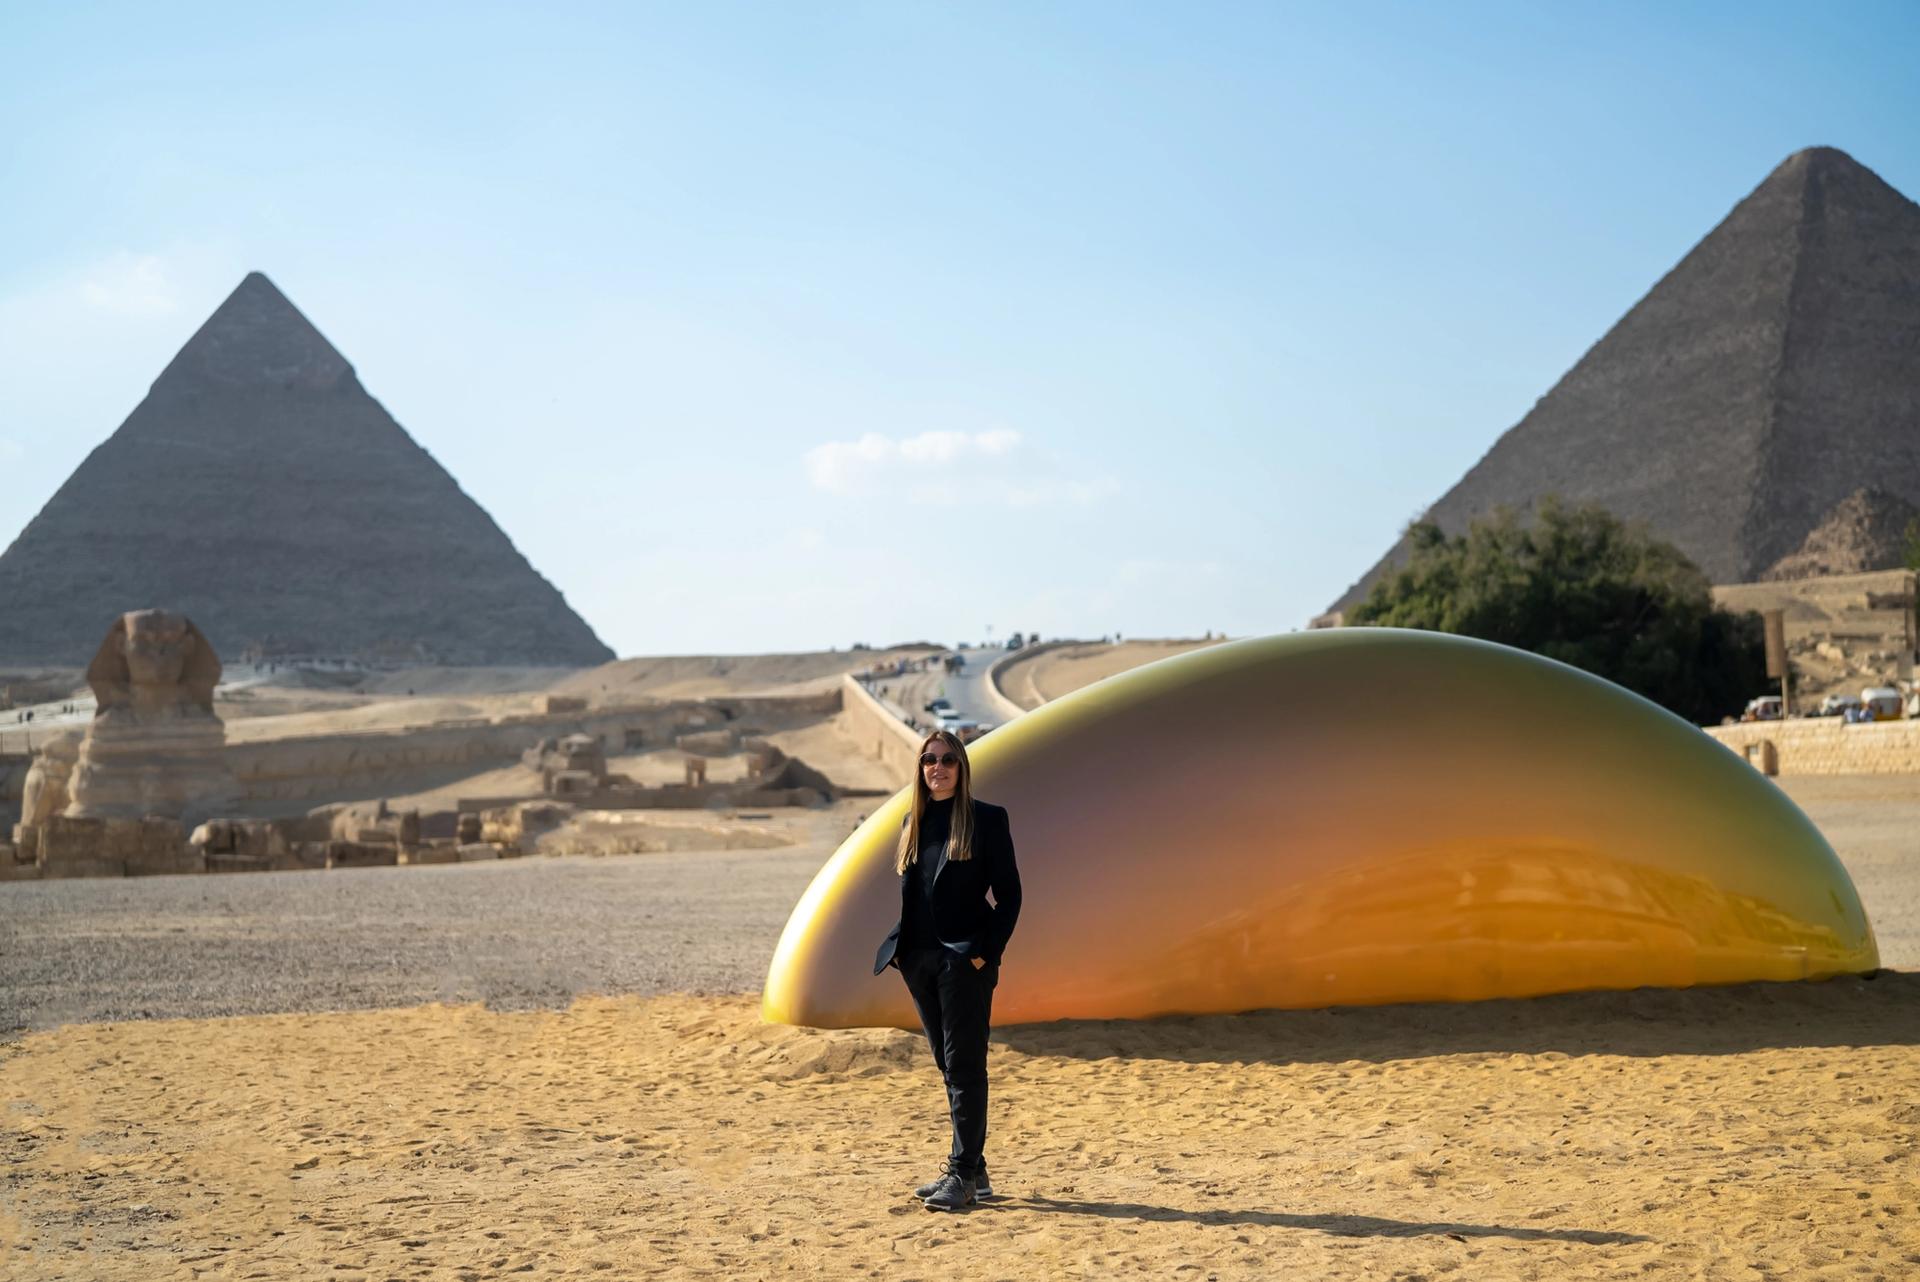 Artist Gisela Colón in front of her sculpture Eternity Now at the Pyramids of Giza Photo: Hesham Al Saifi; courtesy of Art d'Egypte 